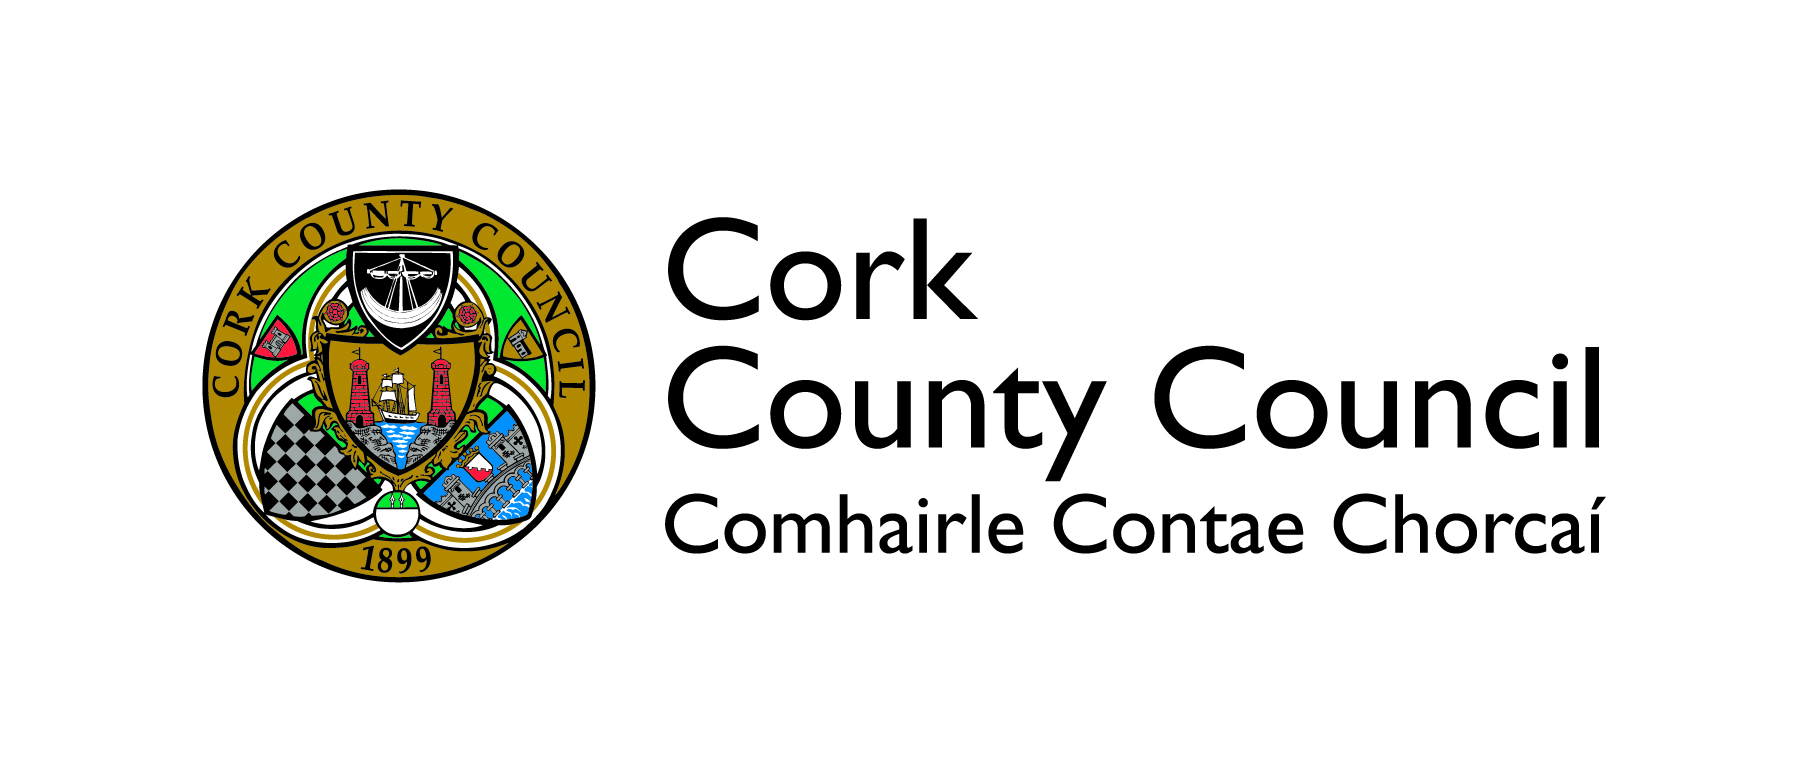 Statement from the Leaders of Political Party’s represented on Cork County Council